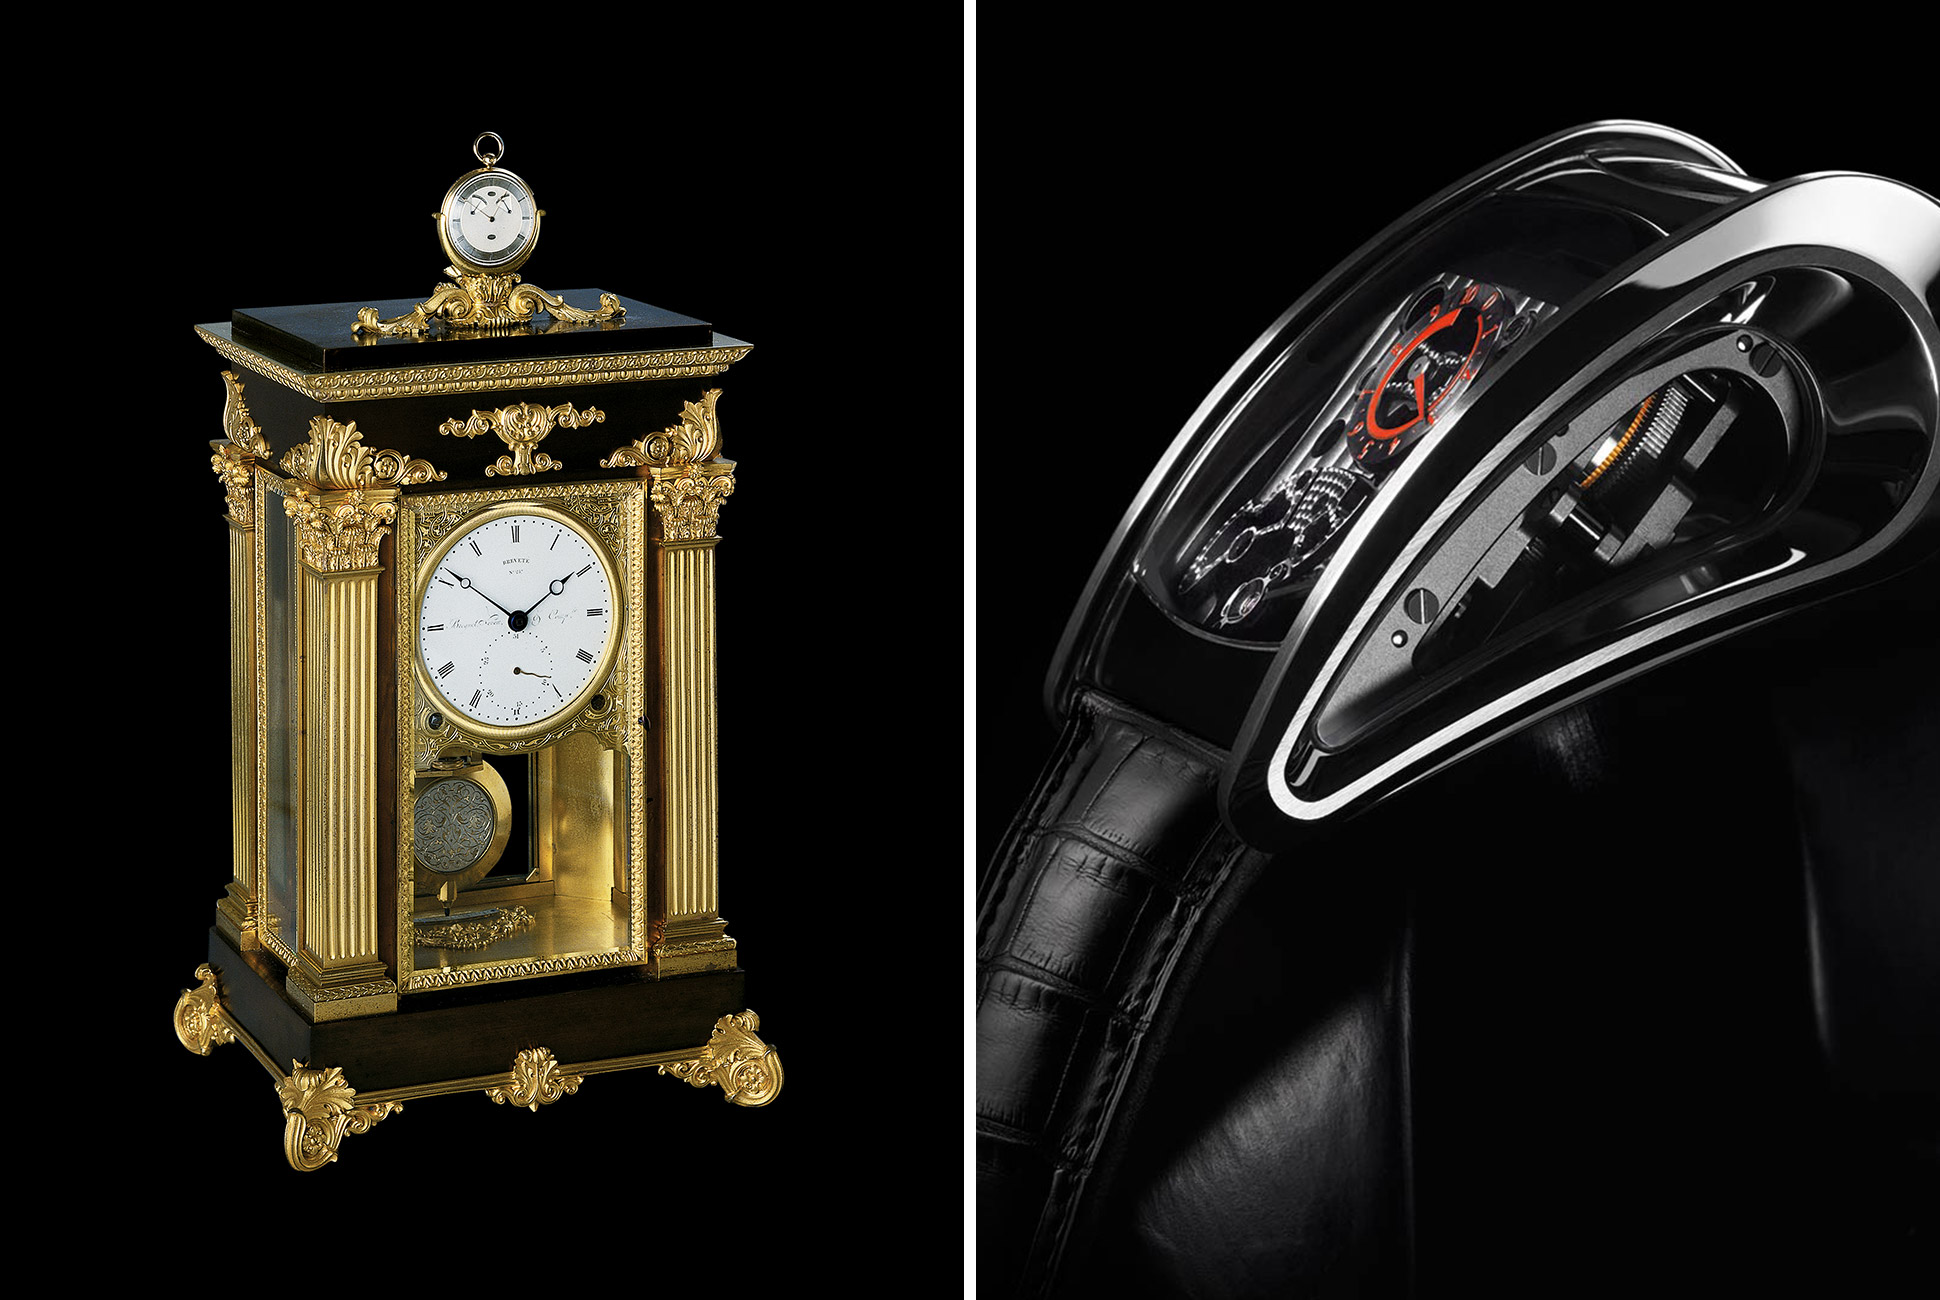 Two of Parmigiani's most interesting (and contrasting pieces): his restoration of a Breguet “sympathetic” clock (a pocket watch that docks and synchronizes to a pendulum clock) and the avant-garde piece created in collaboration with Bugatti.